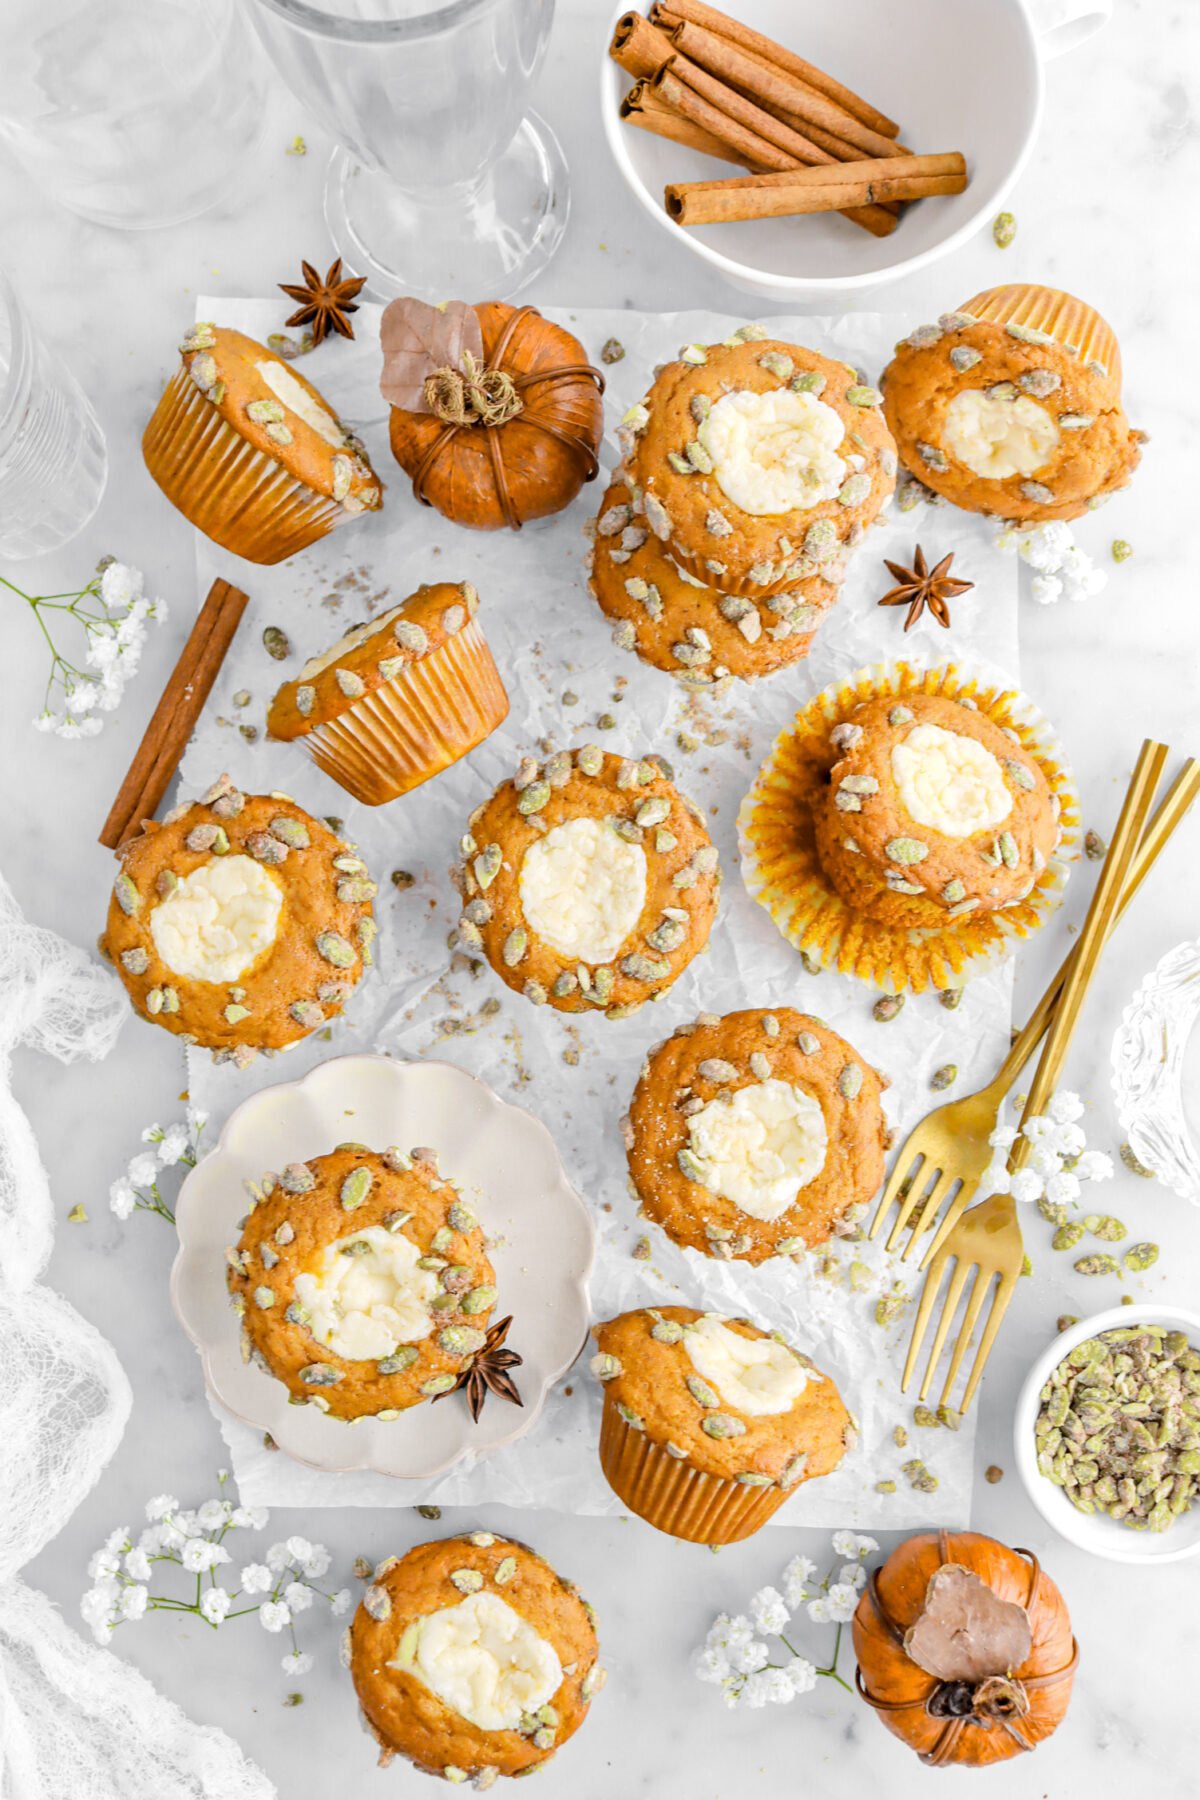 overhead image of twelve pumpkin muffins on parchment paper with one muffin on small plate with forks, faux pumpkins, white flowers, whole spices, and candied pumpkin seeds around.